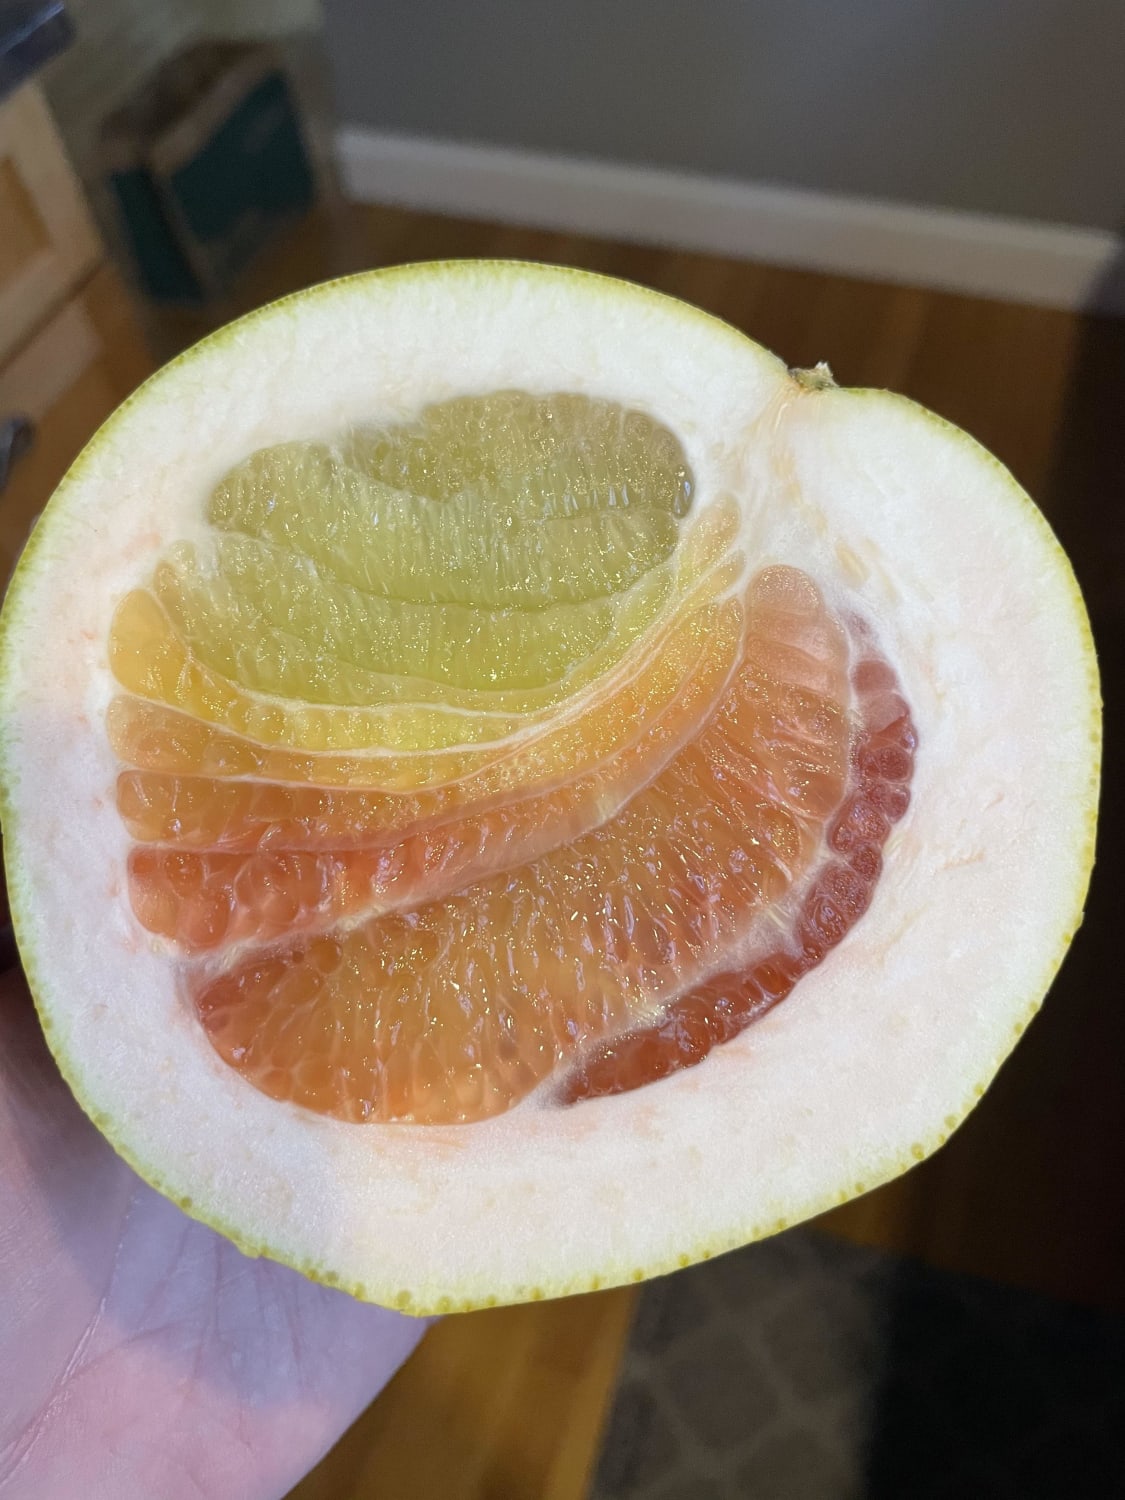 Sliced into a pomelo the other day...